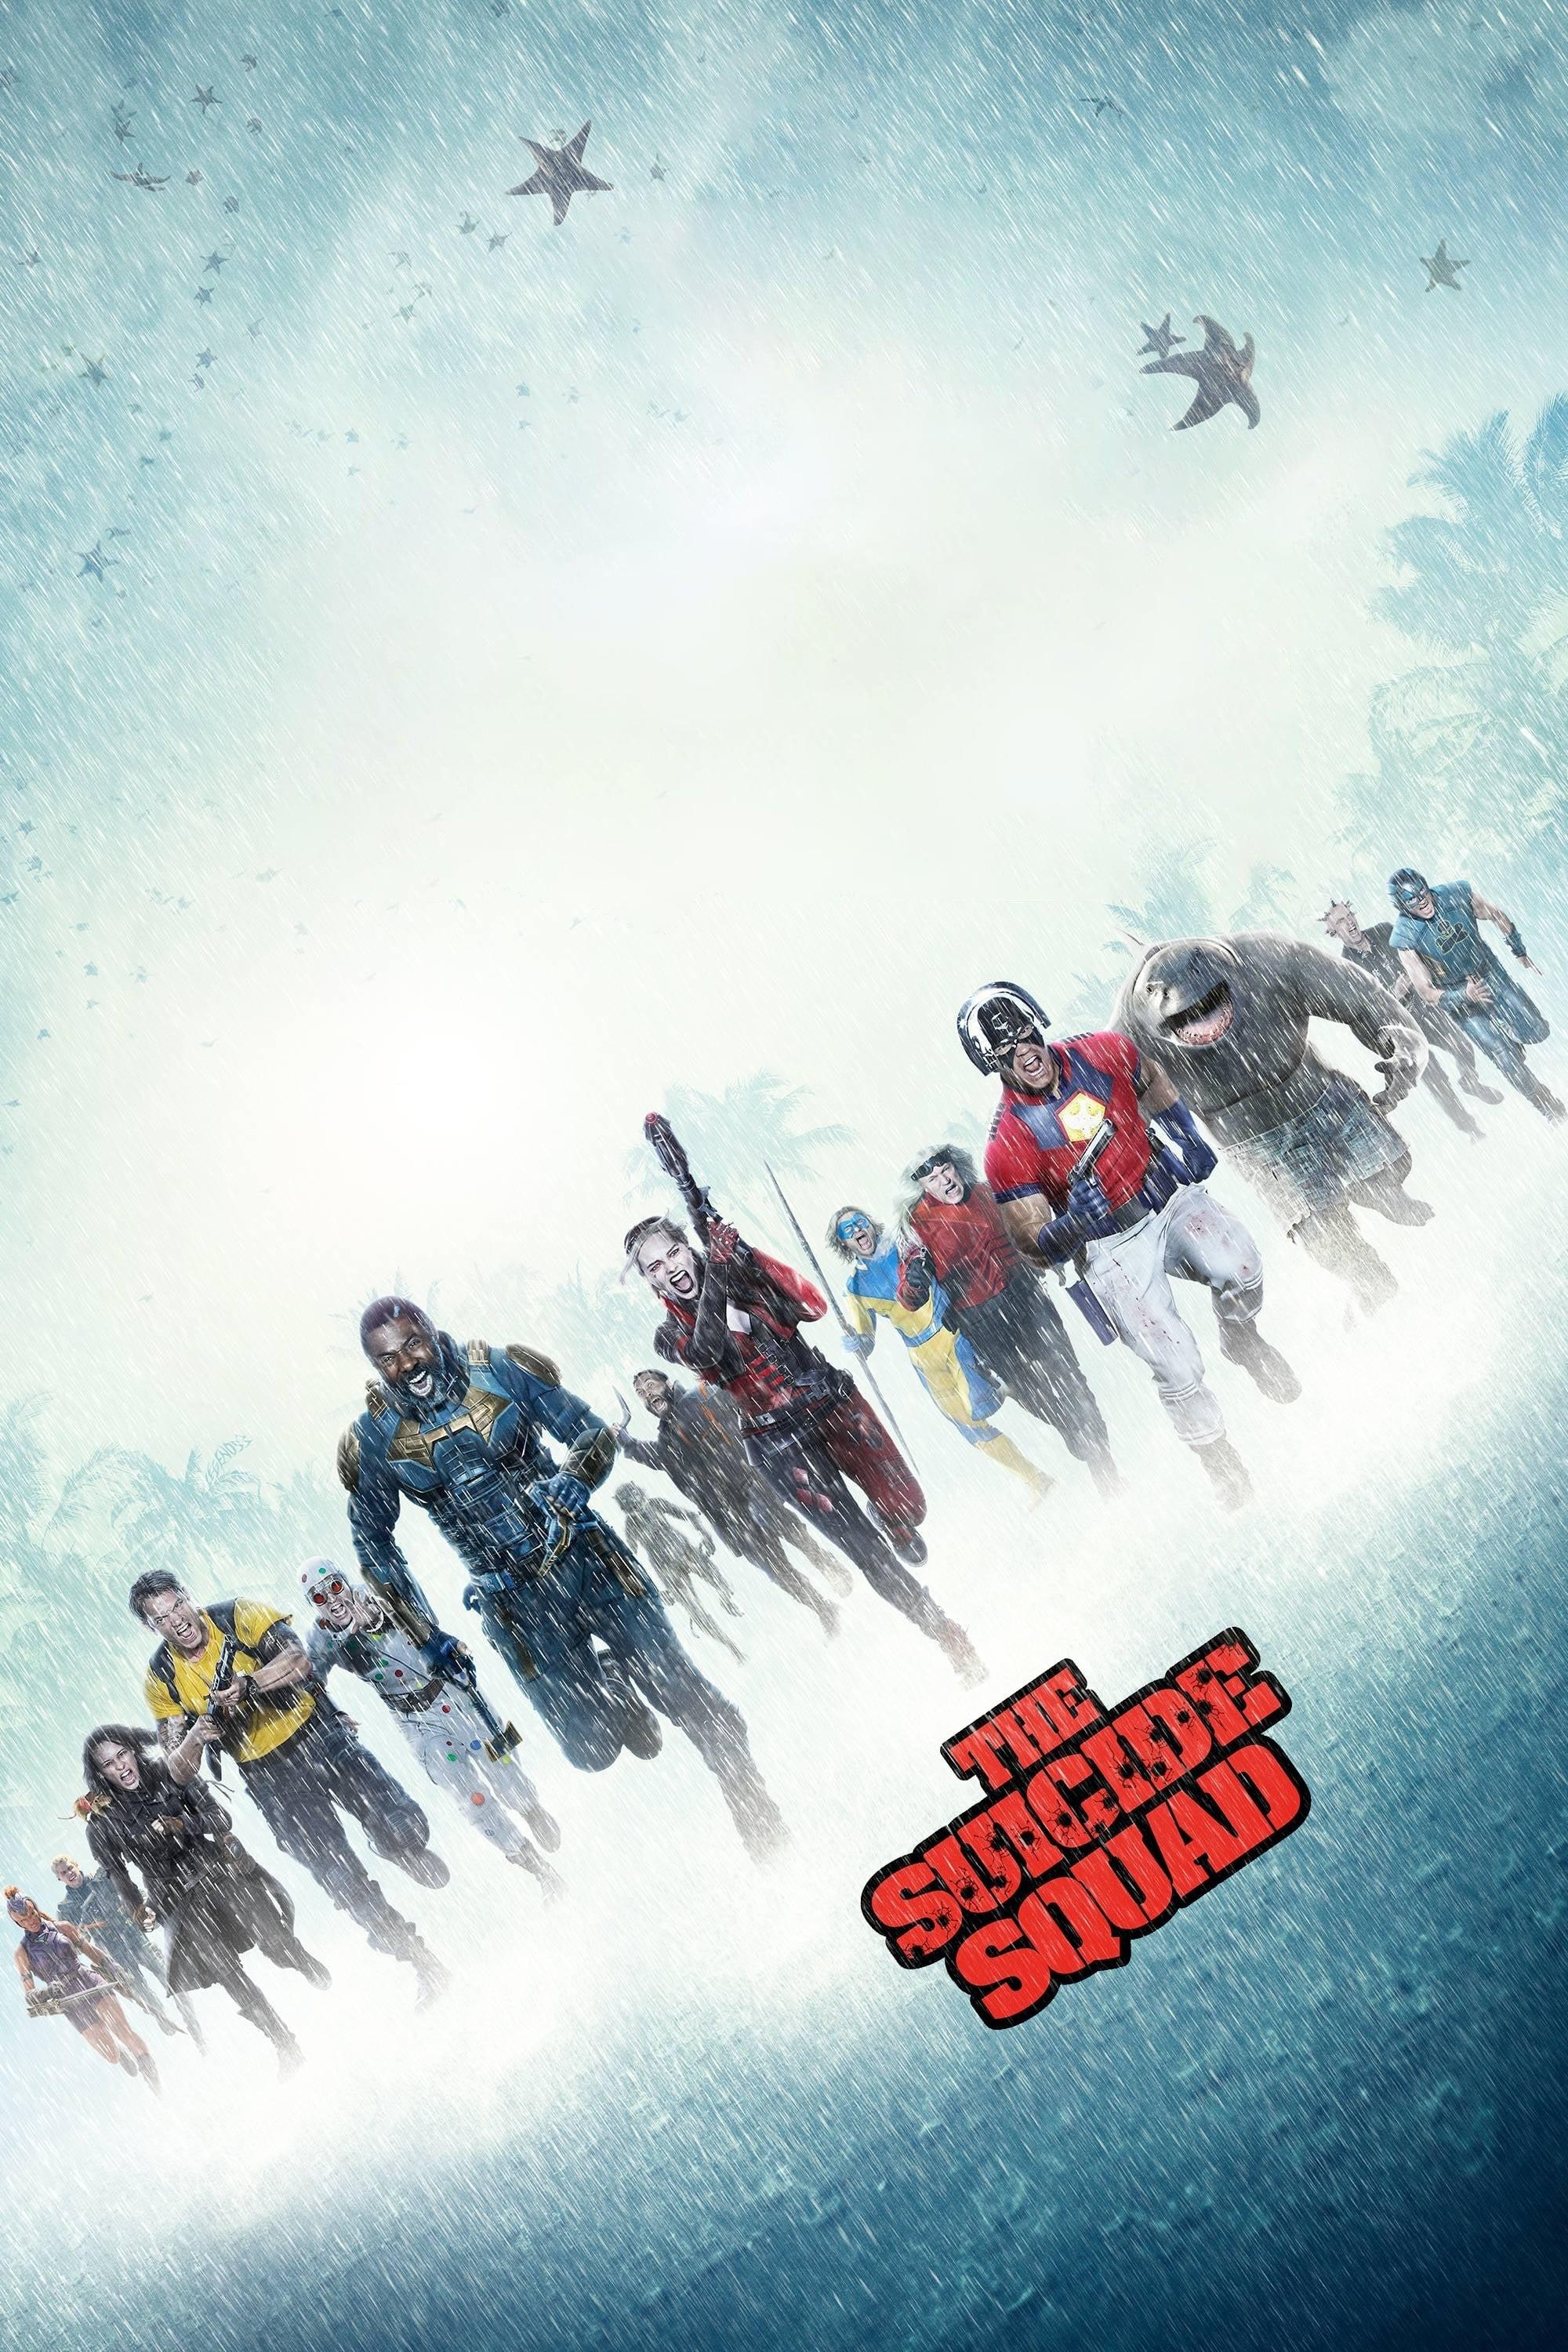 The Suicide Squad poster